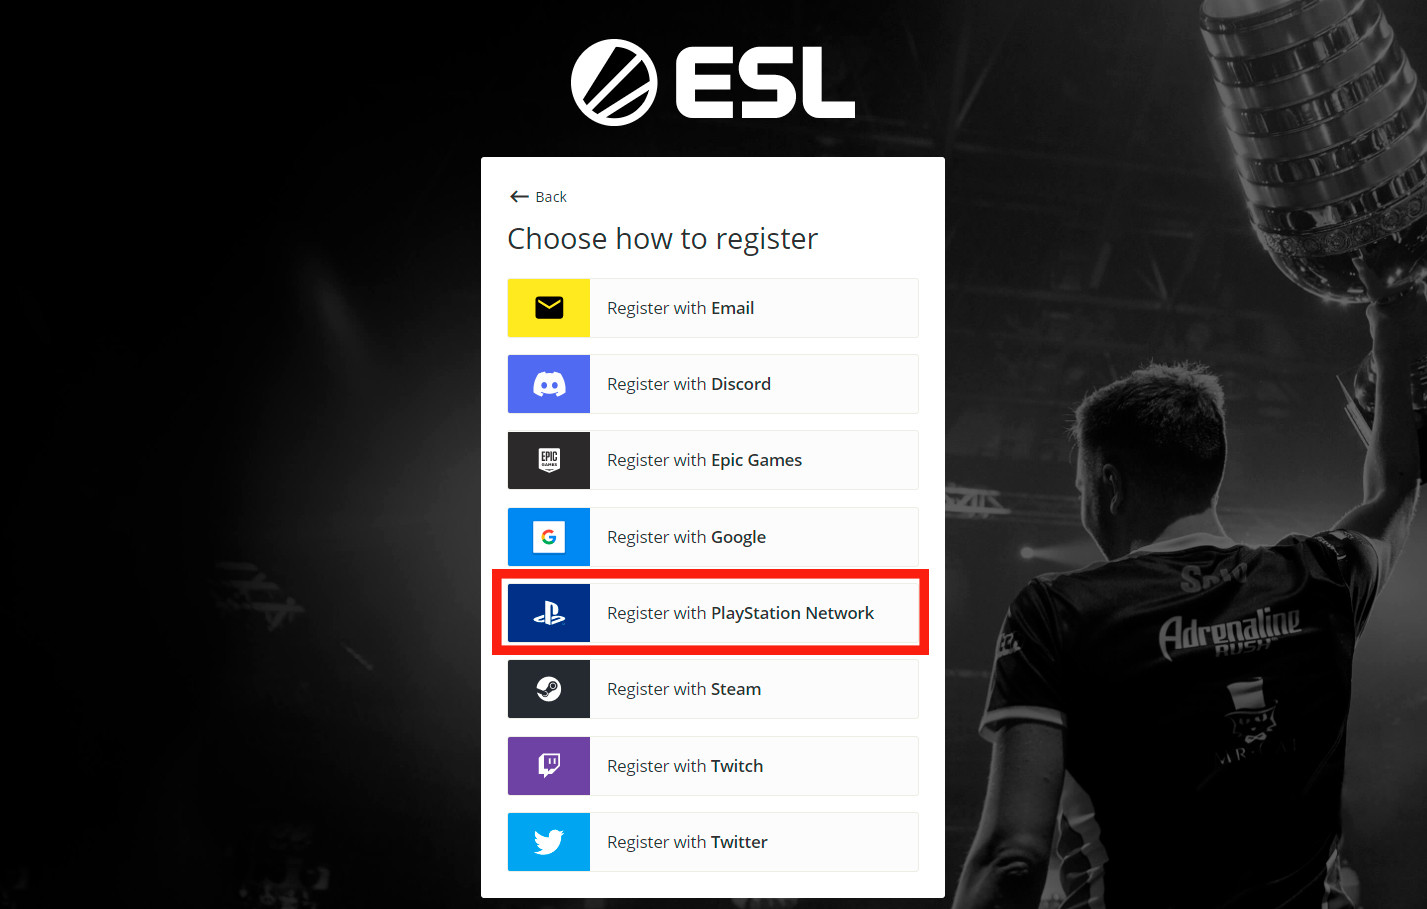 How Do I Link My ESL Account to My PlayStation Network Account?